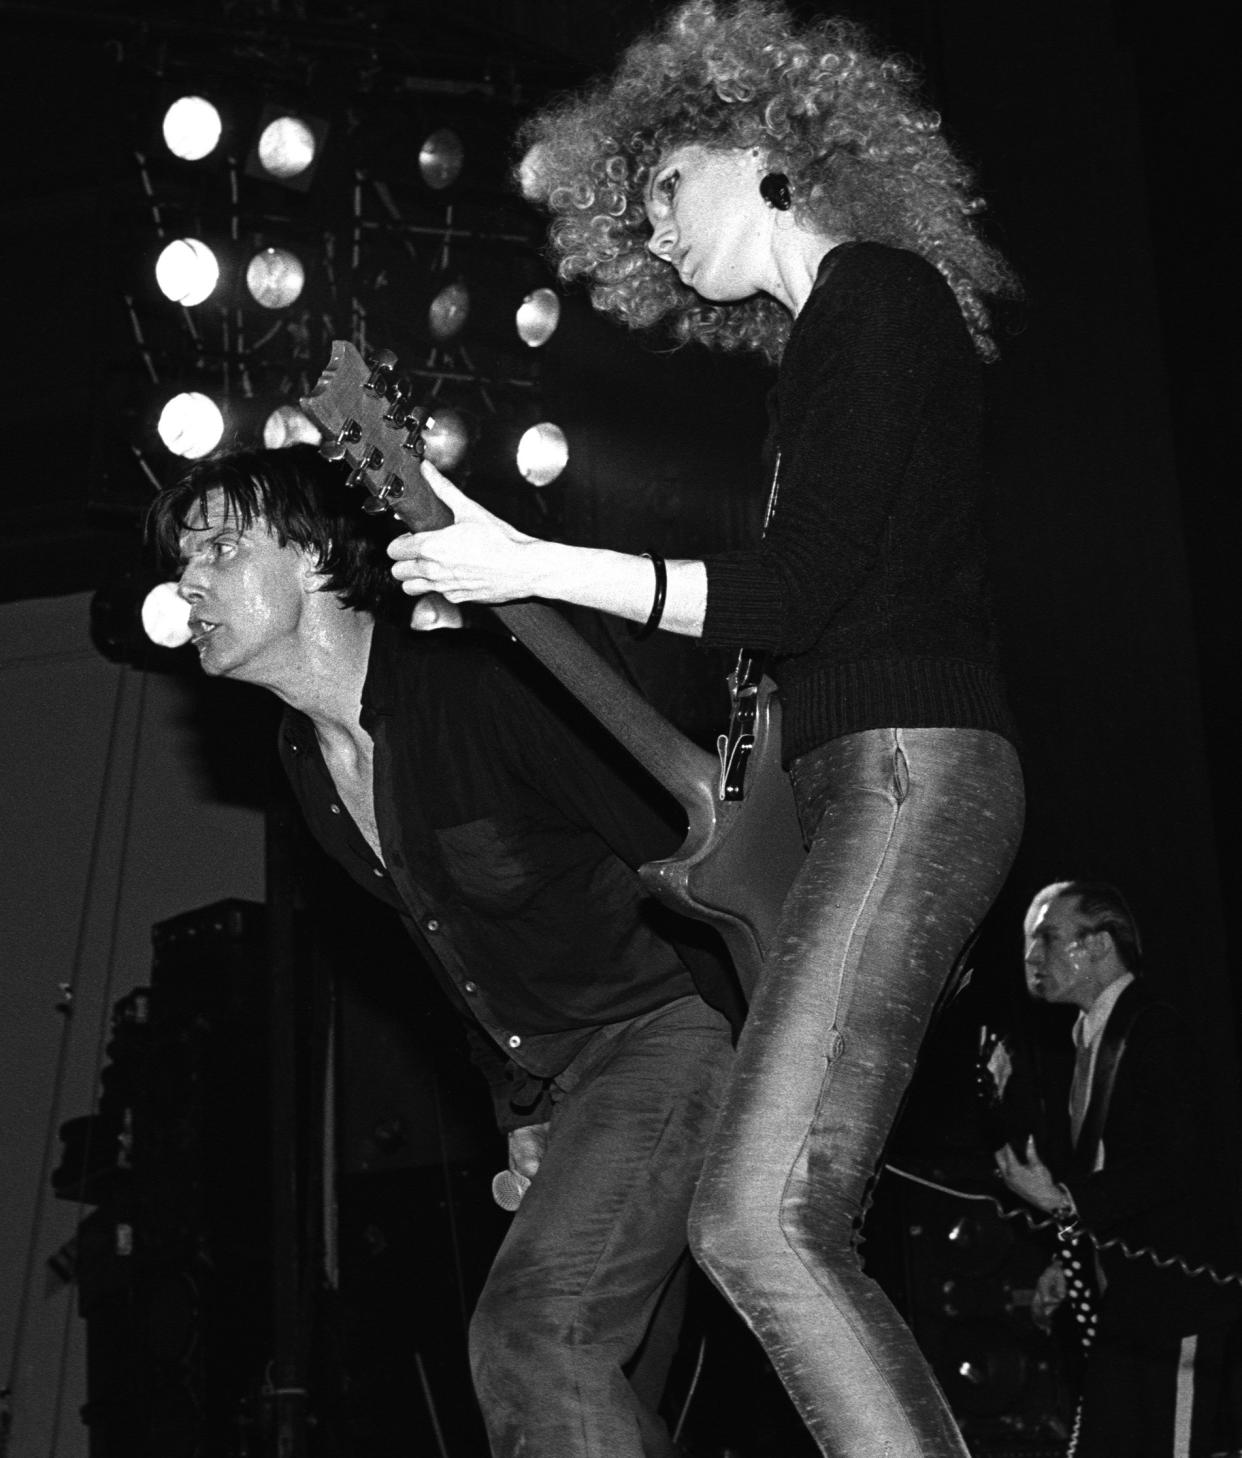 The Cramps in the late ’70s. (Photo: Ebet Roberts/Redferns)